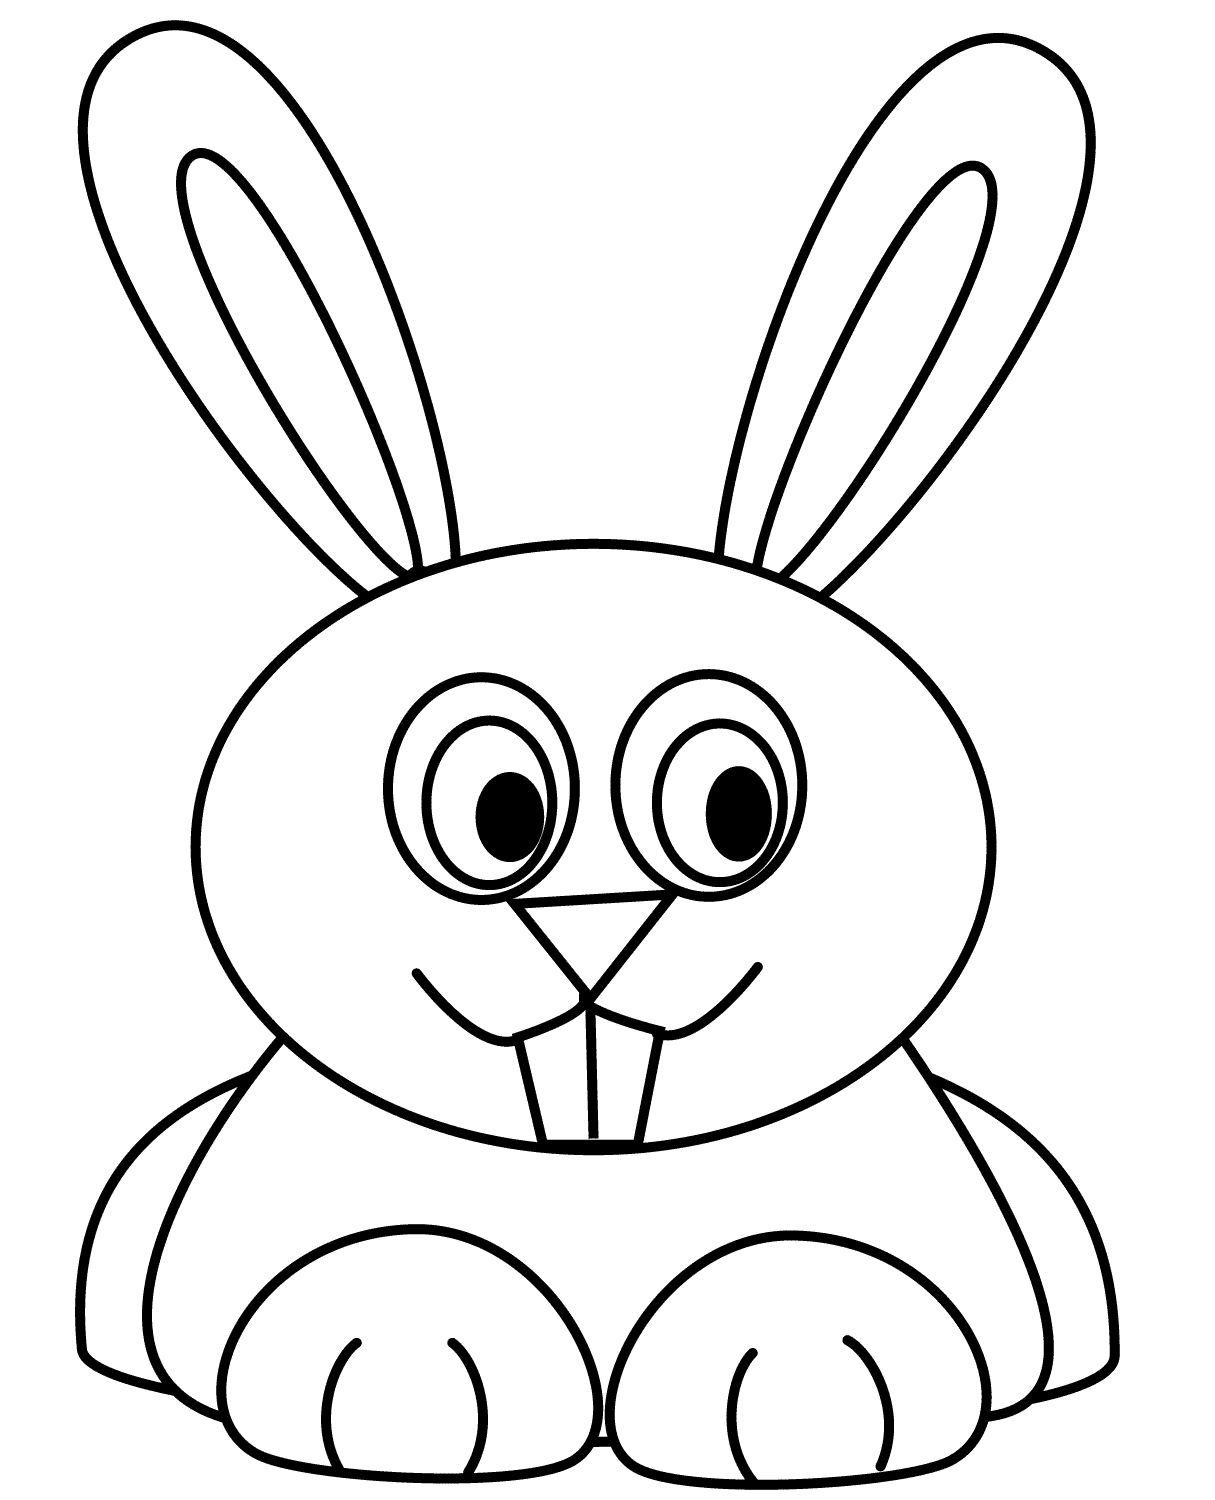 Silly cartoon rabbit has two incisors teeth on the top Coloring Page